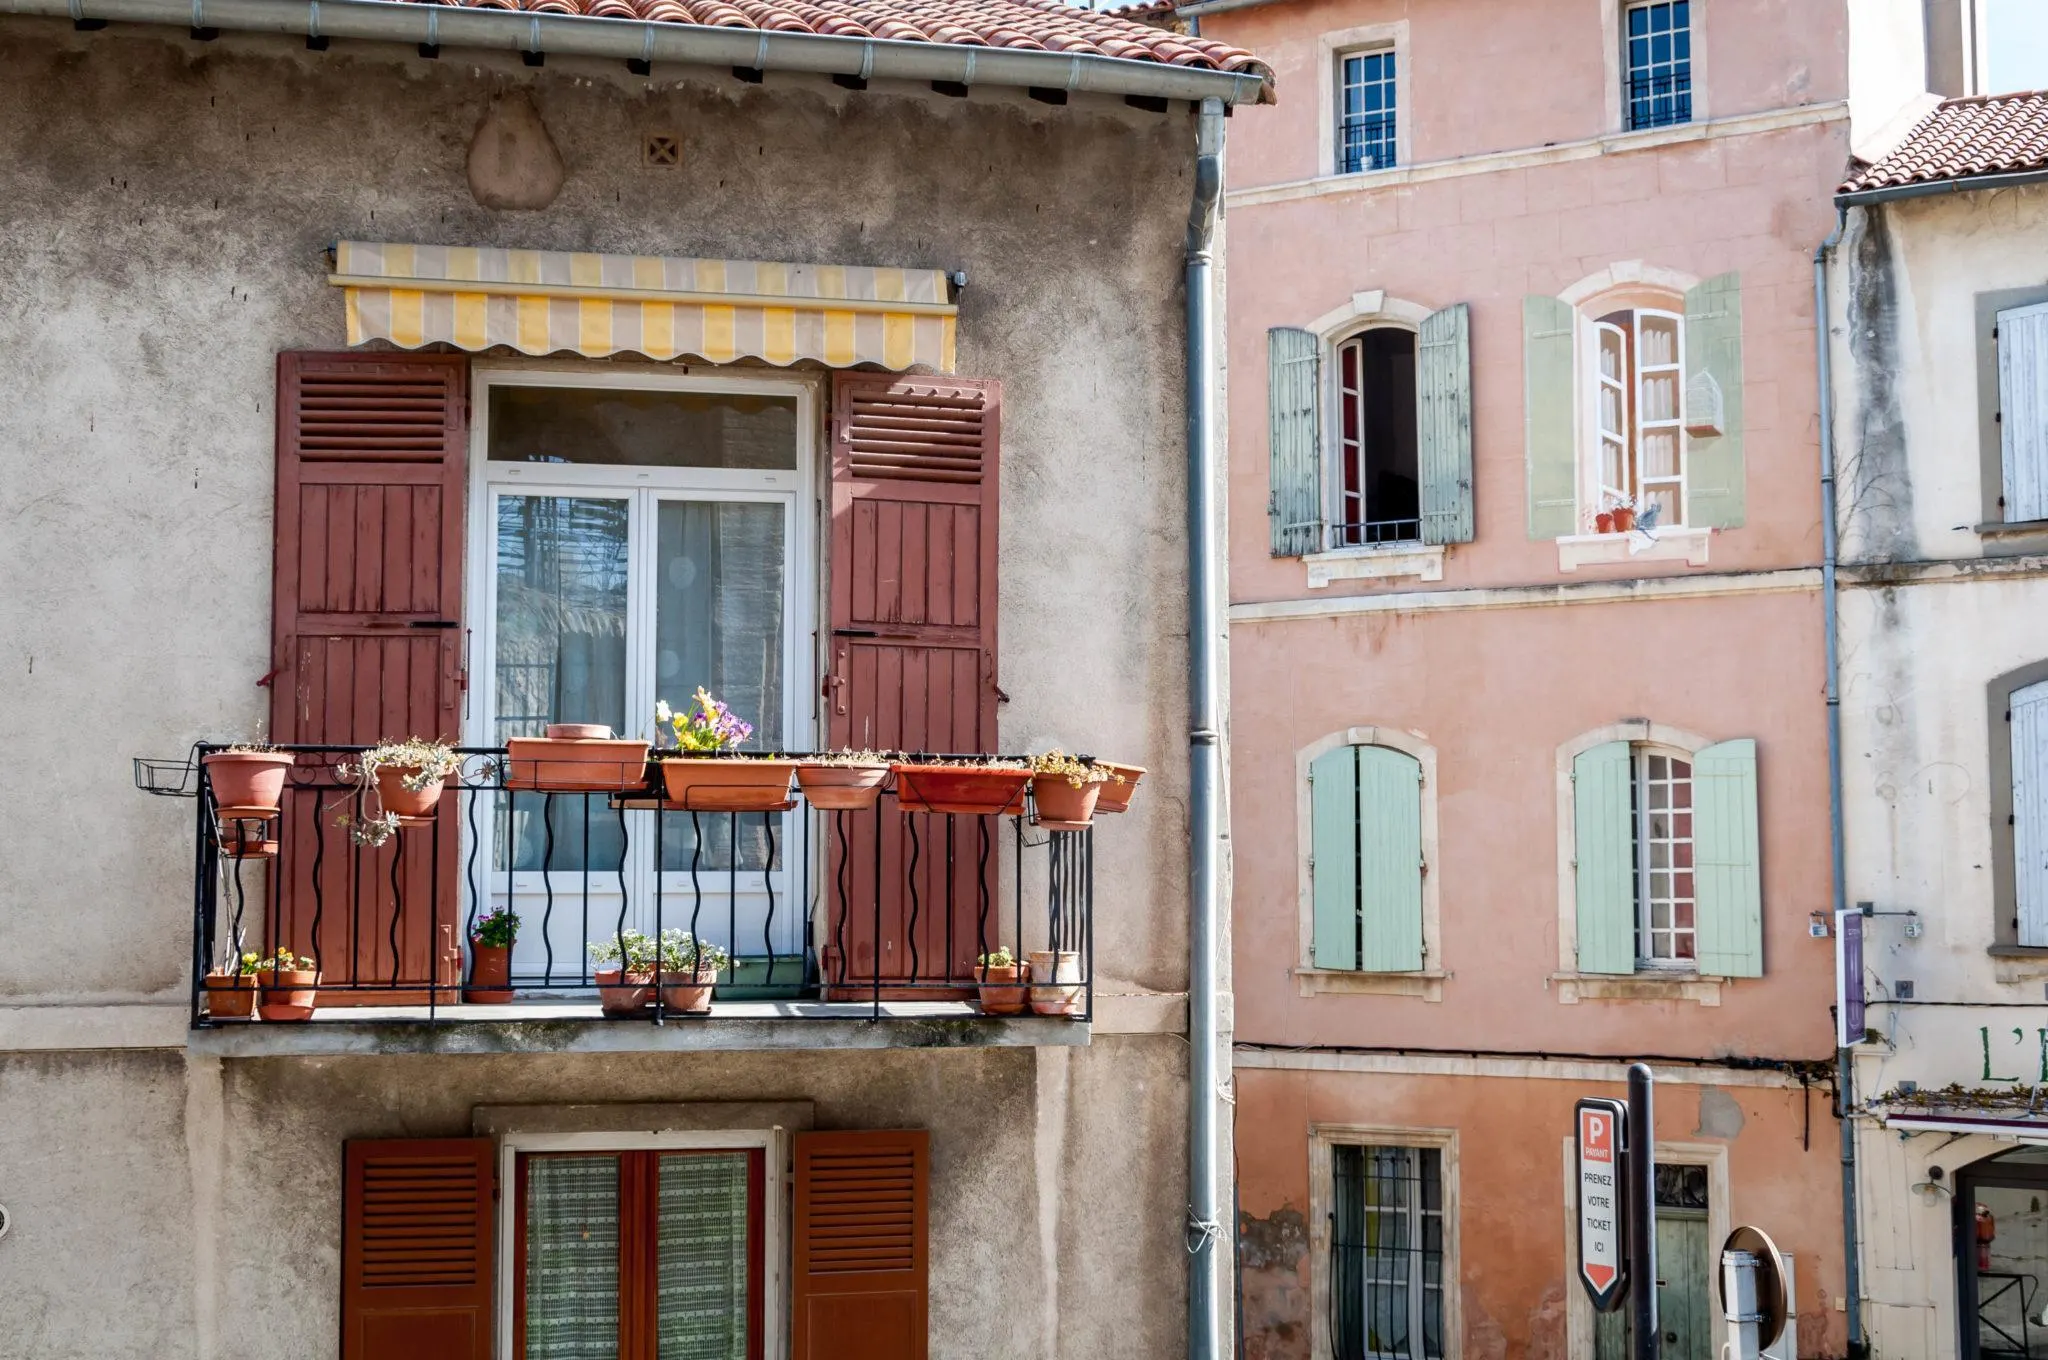 Window boxes and colorful window shutters in Arles, France